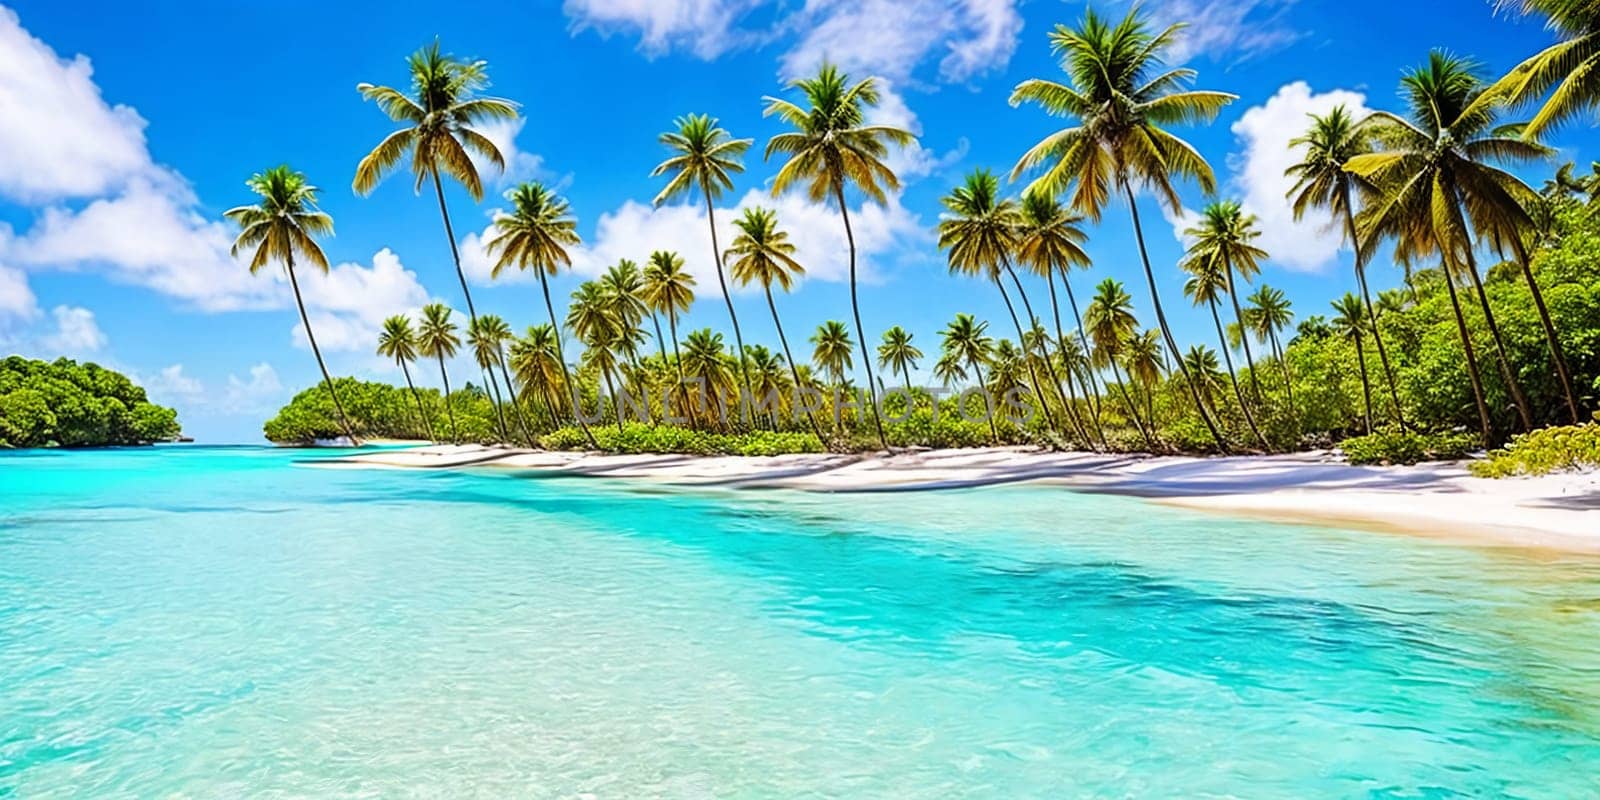 A tranquil sea stretches alongside a long white beach, where a gracefully curved palm tree sways in the breeze.